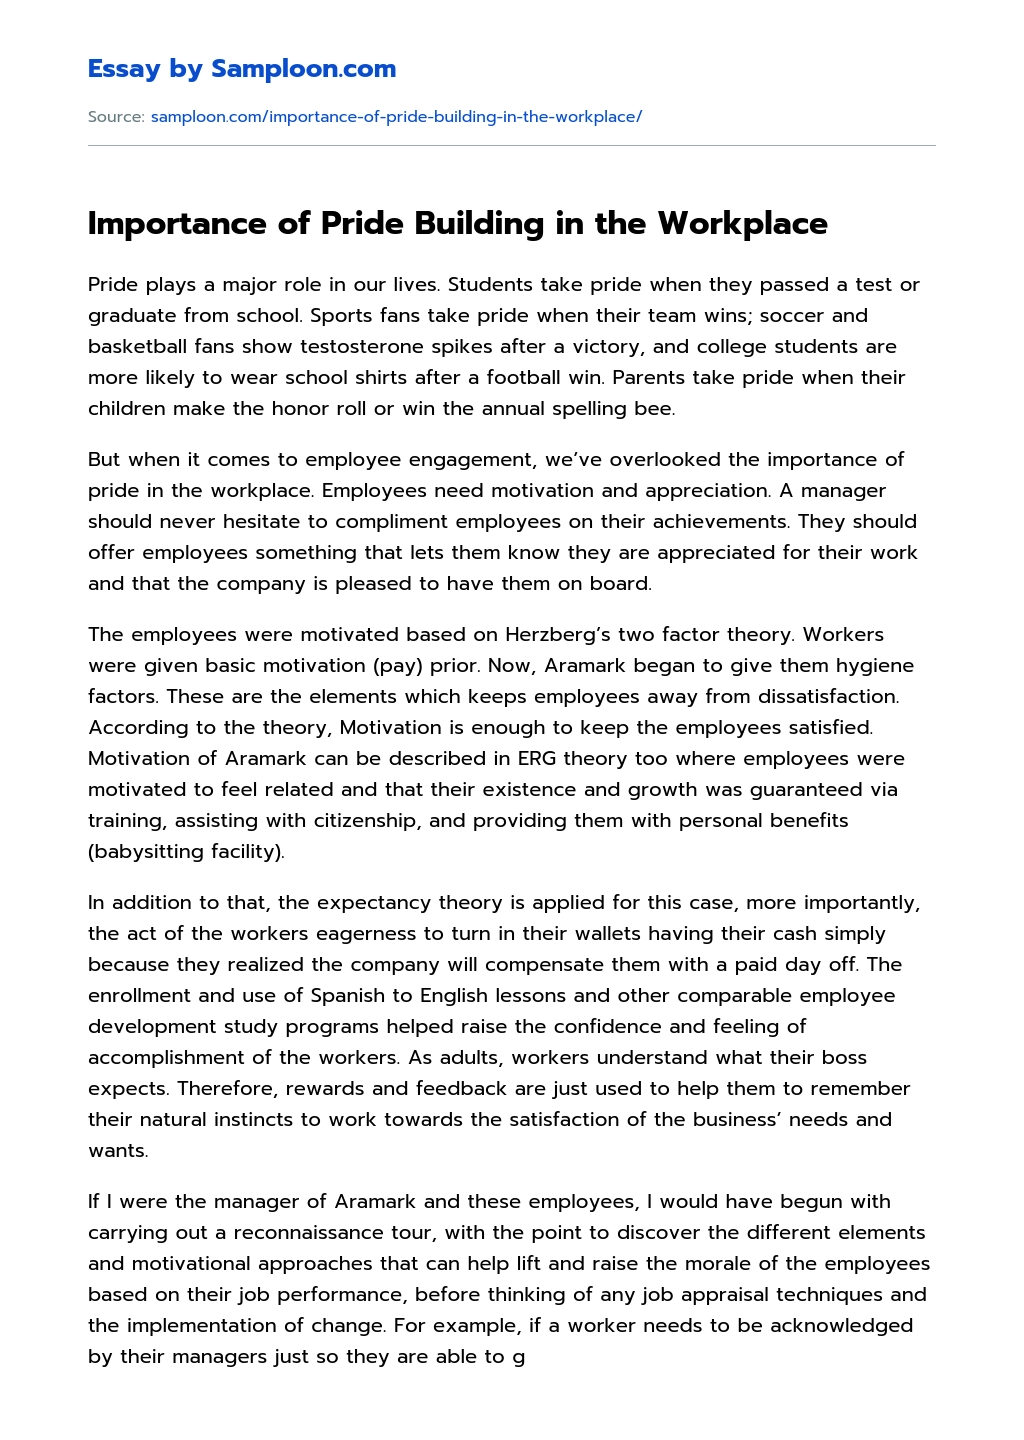 Importance of Pride Building in the Workplace essay